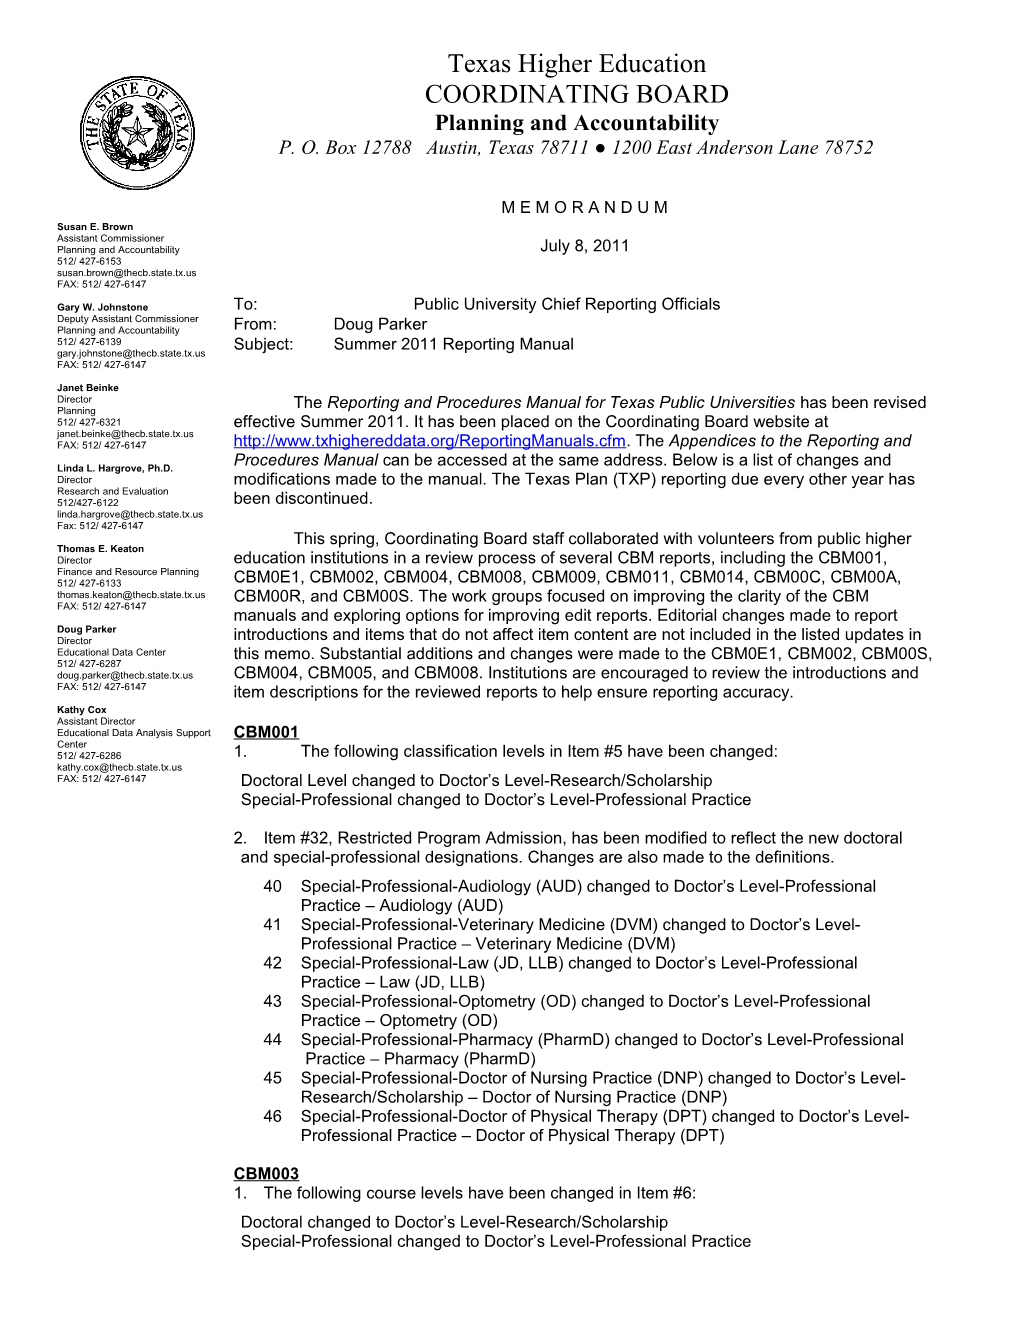 Memos Related to Changes to the CBM Manual for Texas Public Universities